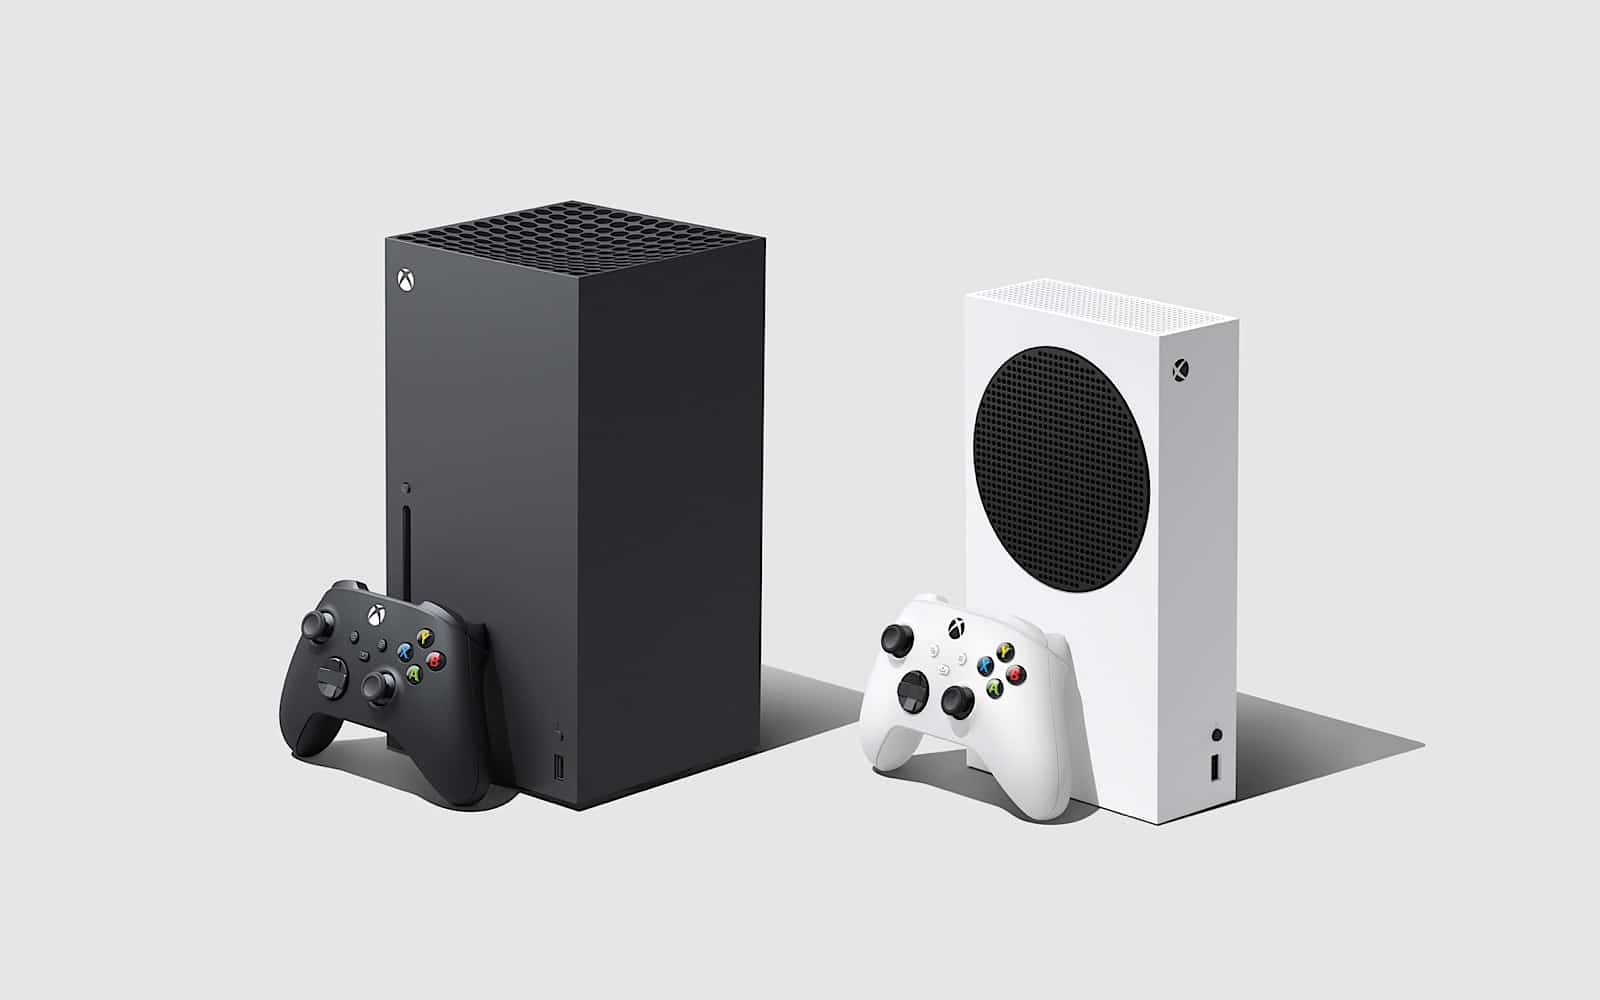 The Xbox Series X (left) next to the Xbox Series S (right)